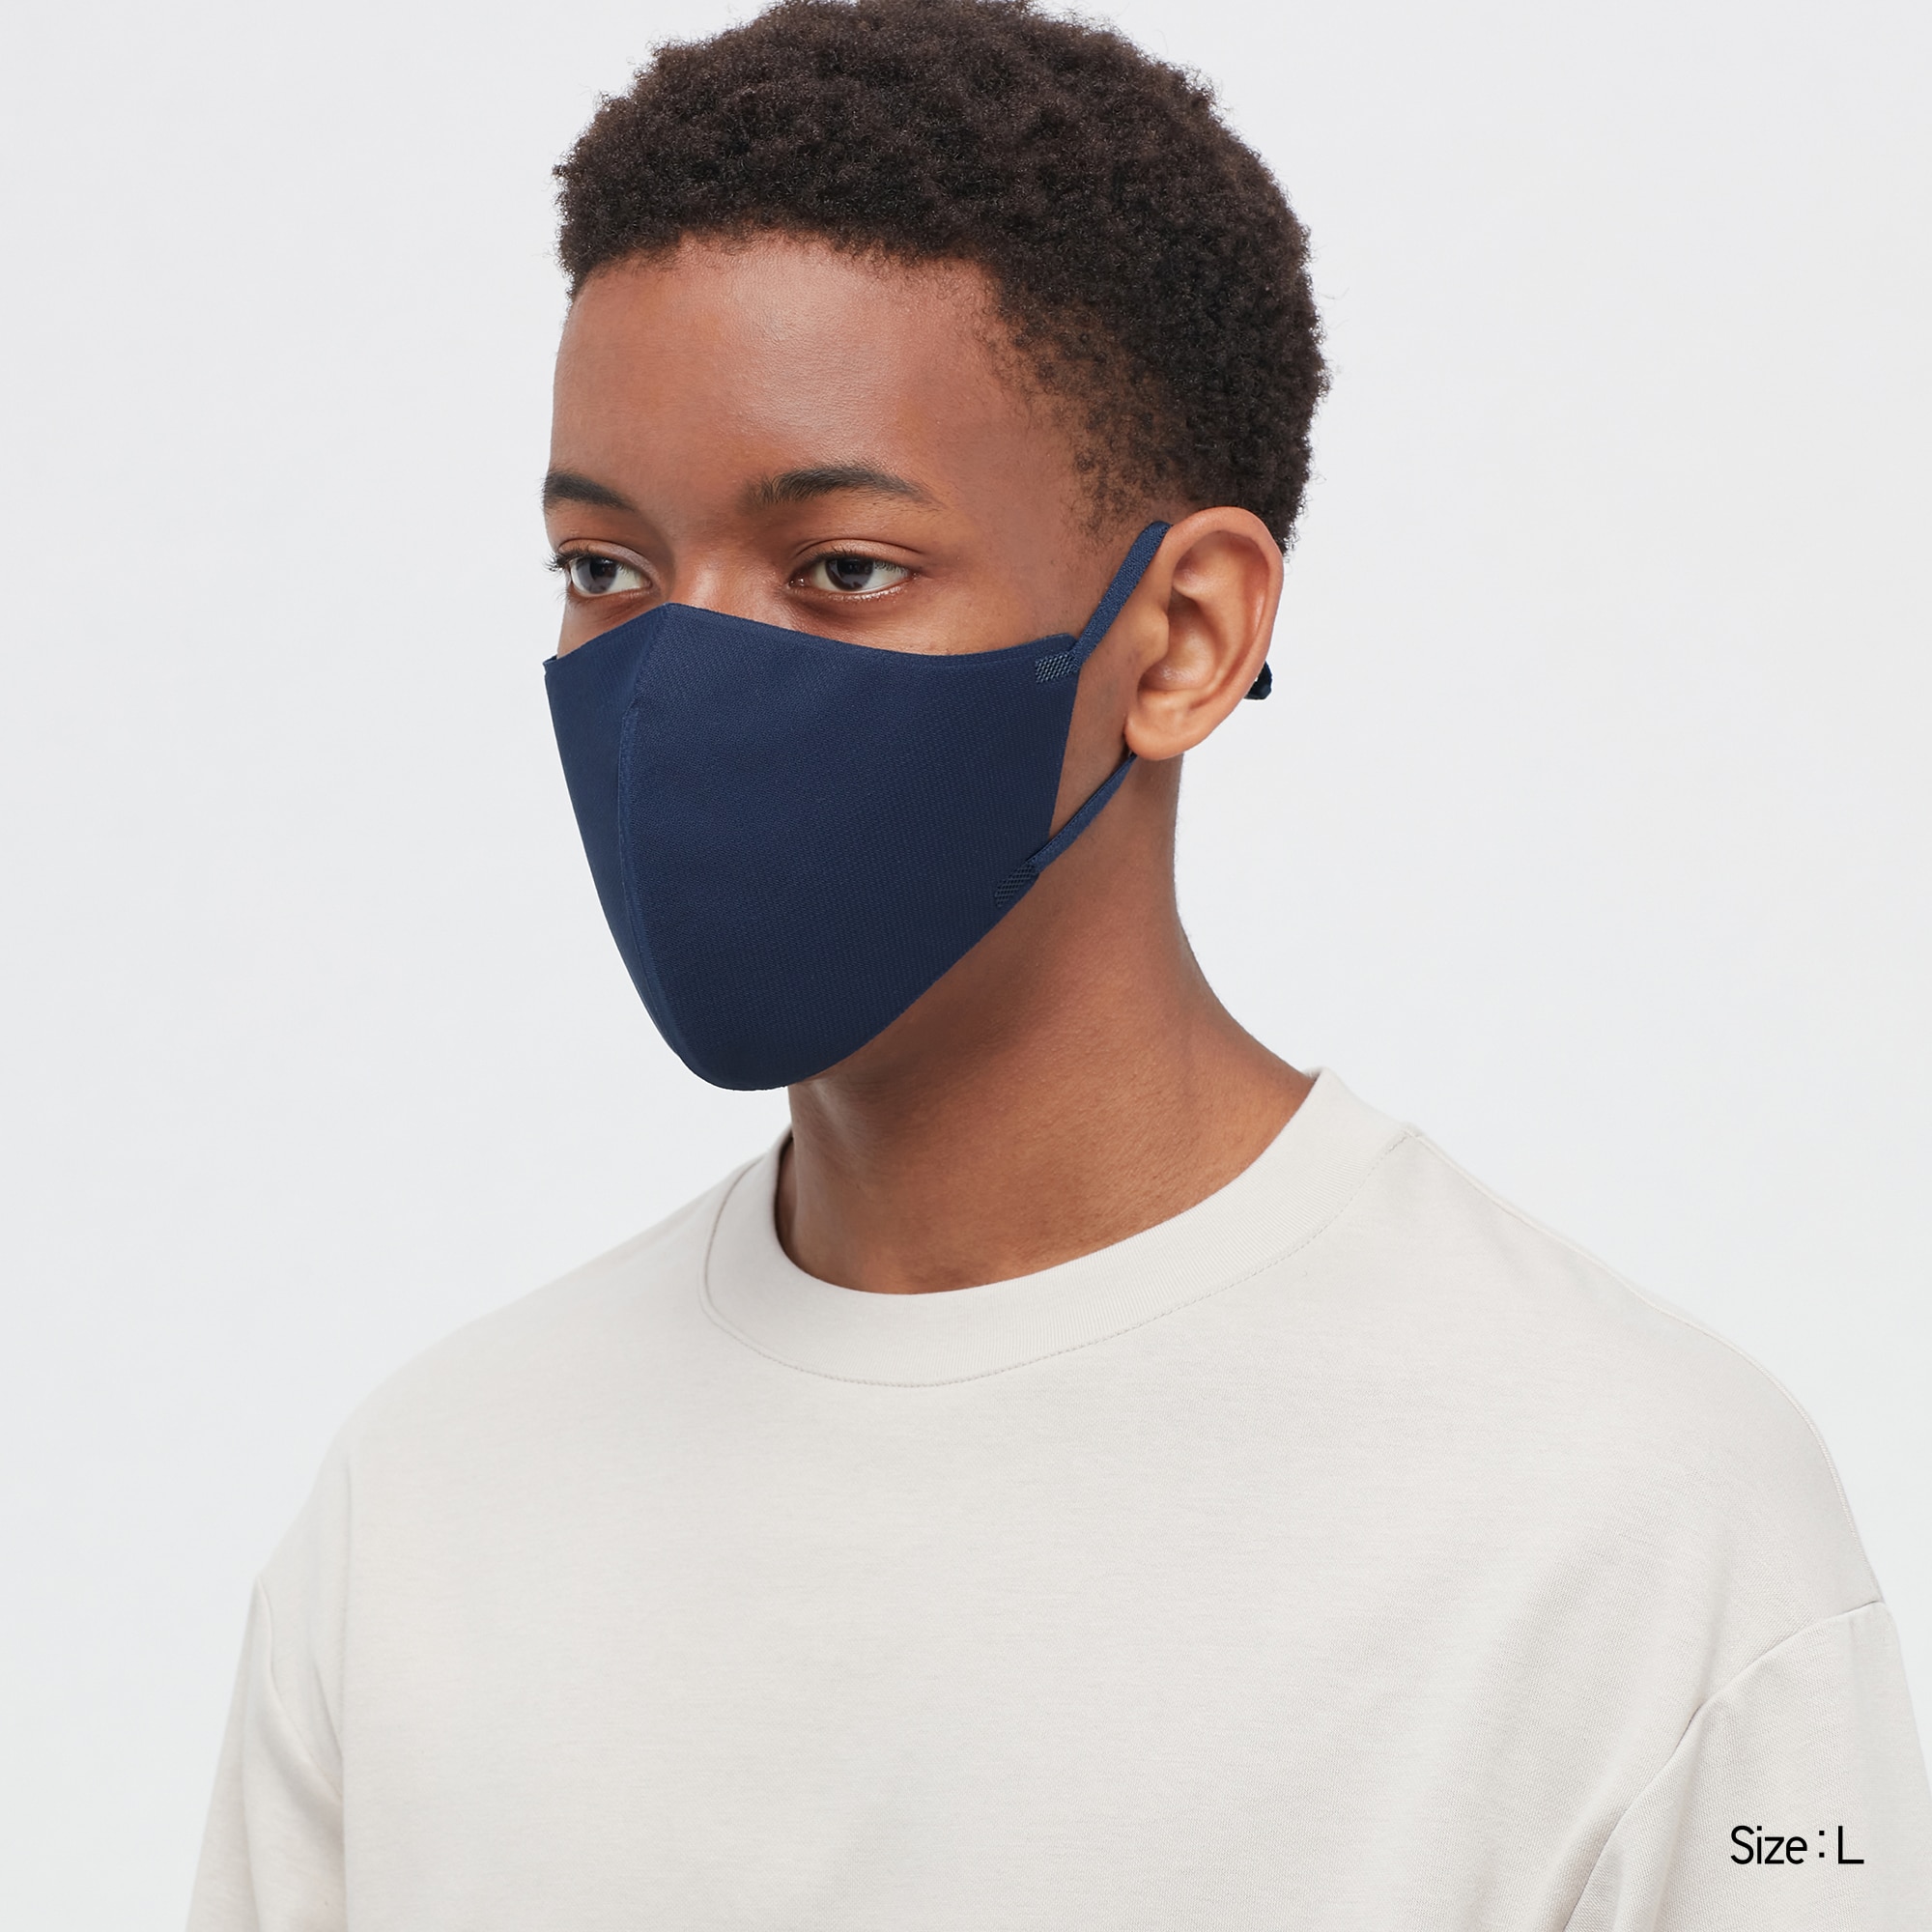 AIRism Face Mask is Uniqlos Answer to Combat COVID19